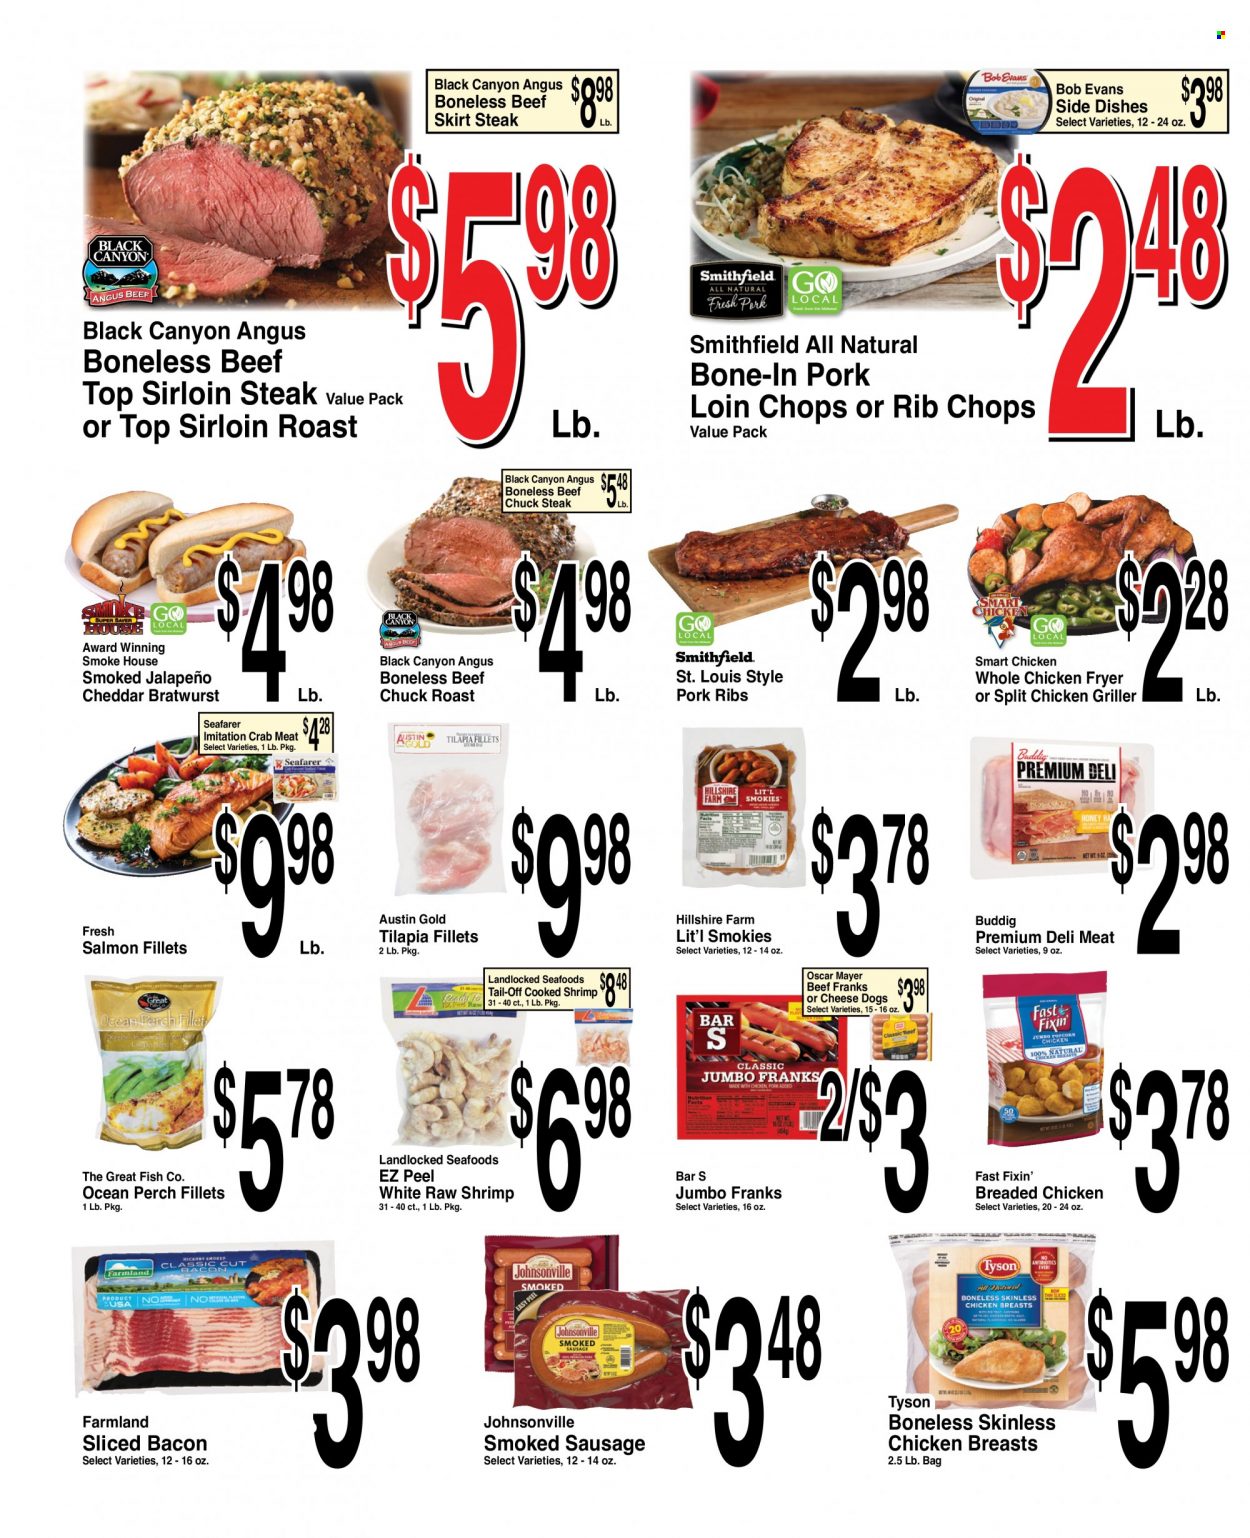 thumbnail - Super Saver Flyer - 02/01/2023 - 02/07/2023 - Sales products - Fast Fixin', jalapeño, crab meat, salmon, salmon fillet, tilapia, perch, crab, fish, shrimps, fried chicken, Bob Evans, bacon, Hillshire Farm, Johnsonville, Oscar Mayer, bratwurst, sausage, smoked sausage, cheddar, whole chicken, beef meat, beef sirloin, steak, sirloin steak, chuck steak, chuck roast, ribs, pork chops, pork loin, pork meat, pork ribs, rib chops. Page 2.